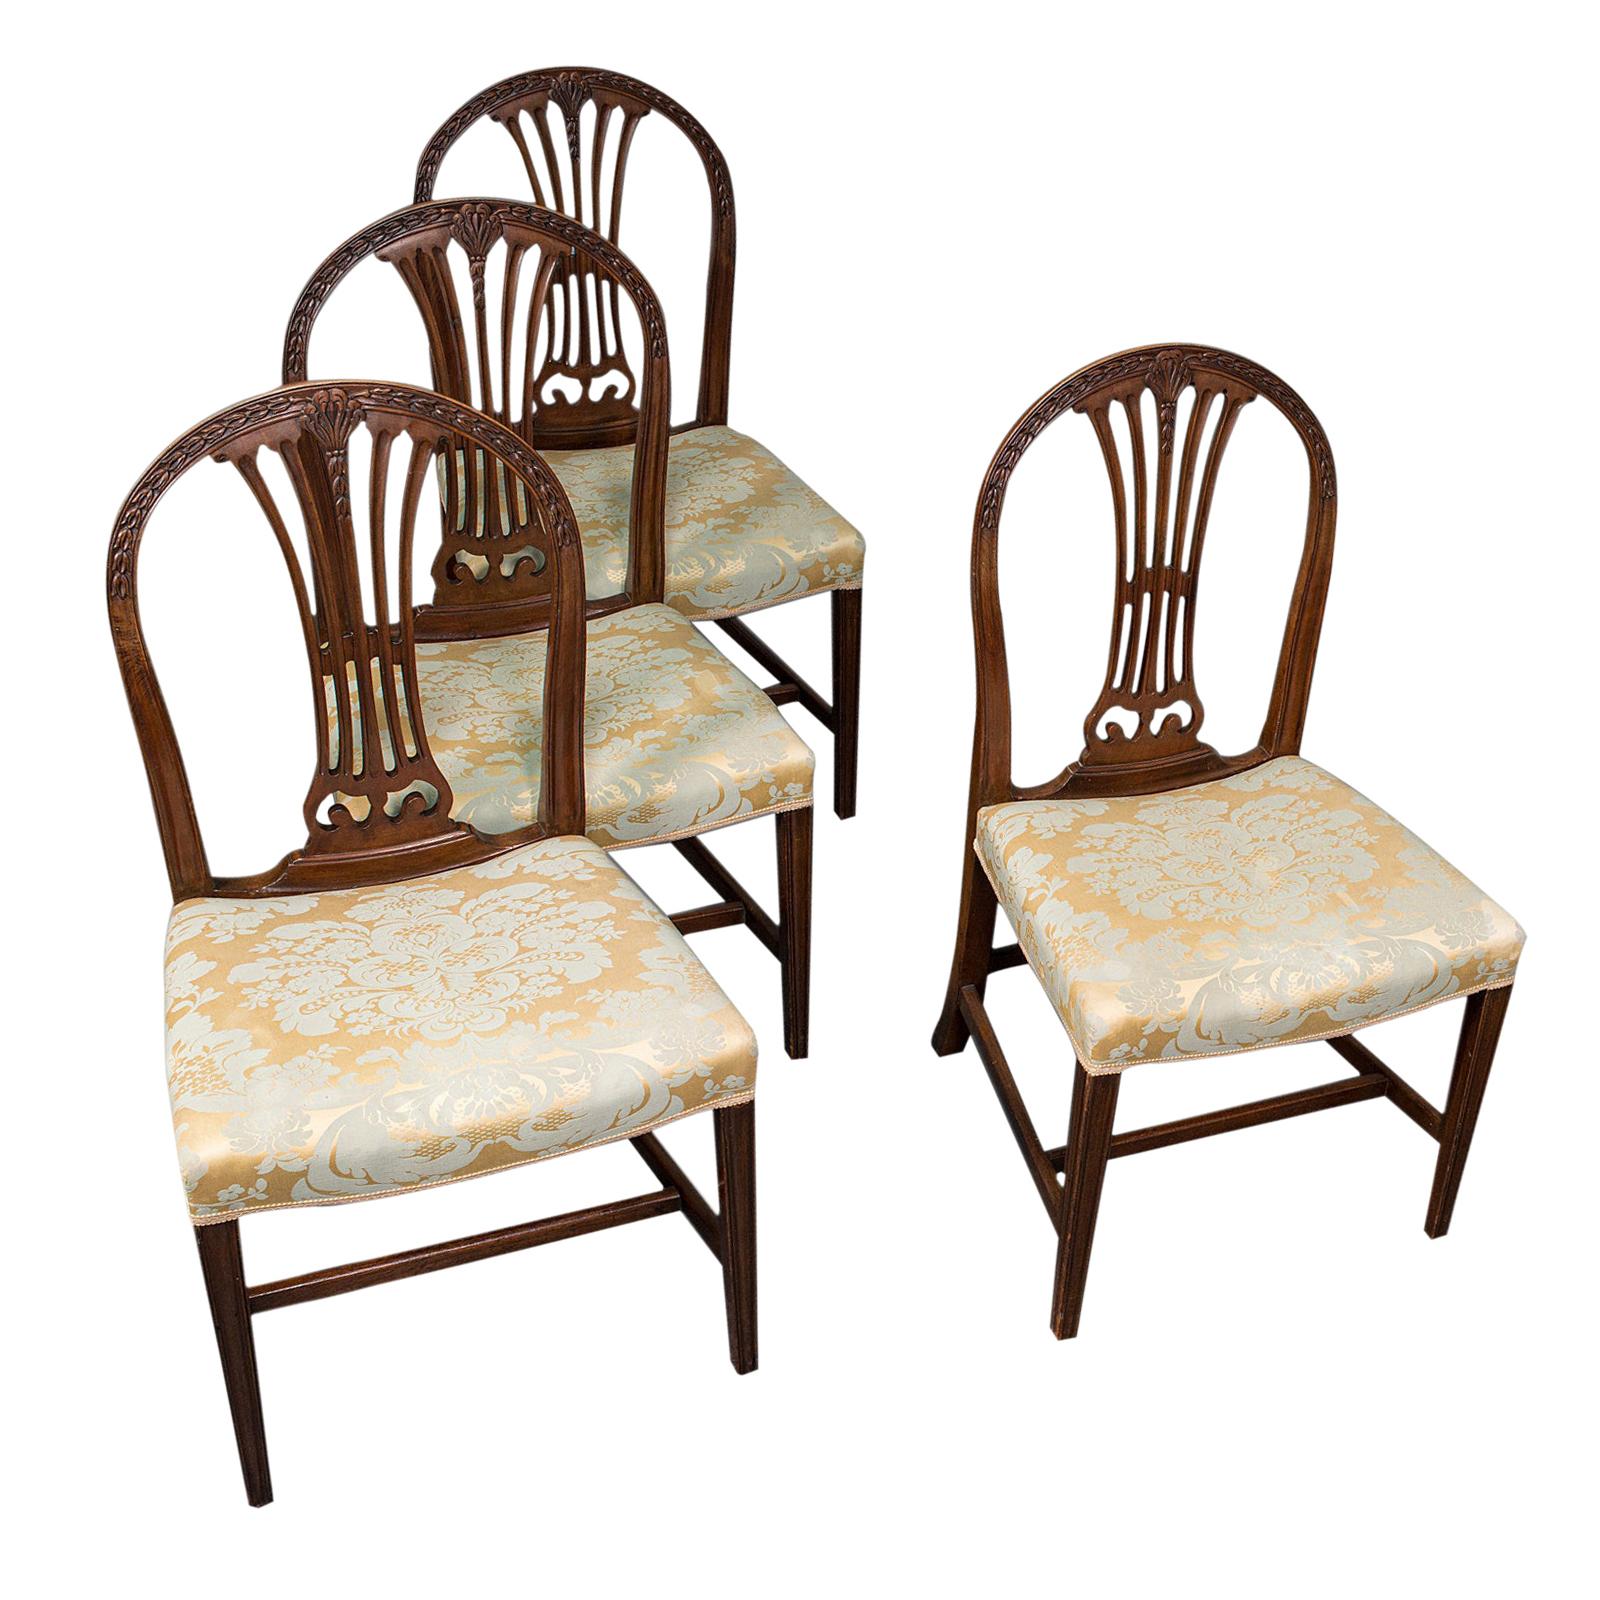 Set of 4 Hepplewhite Revival Chairs, English, Mahogany, Dining Suite, Victorian